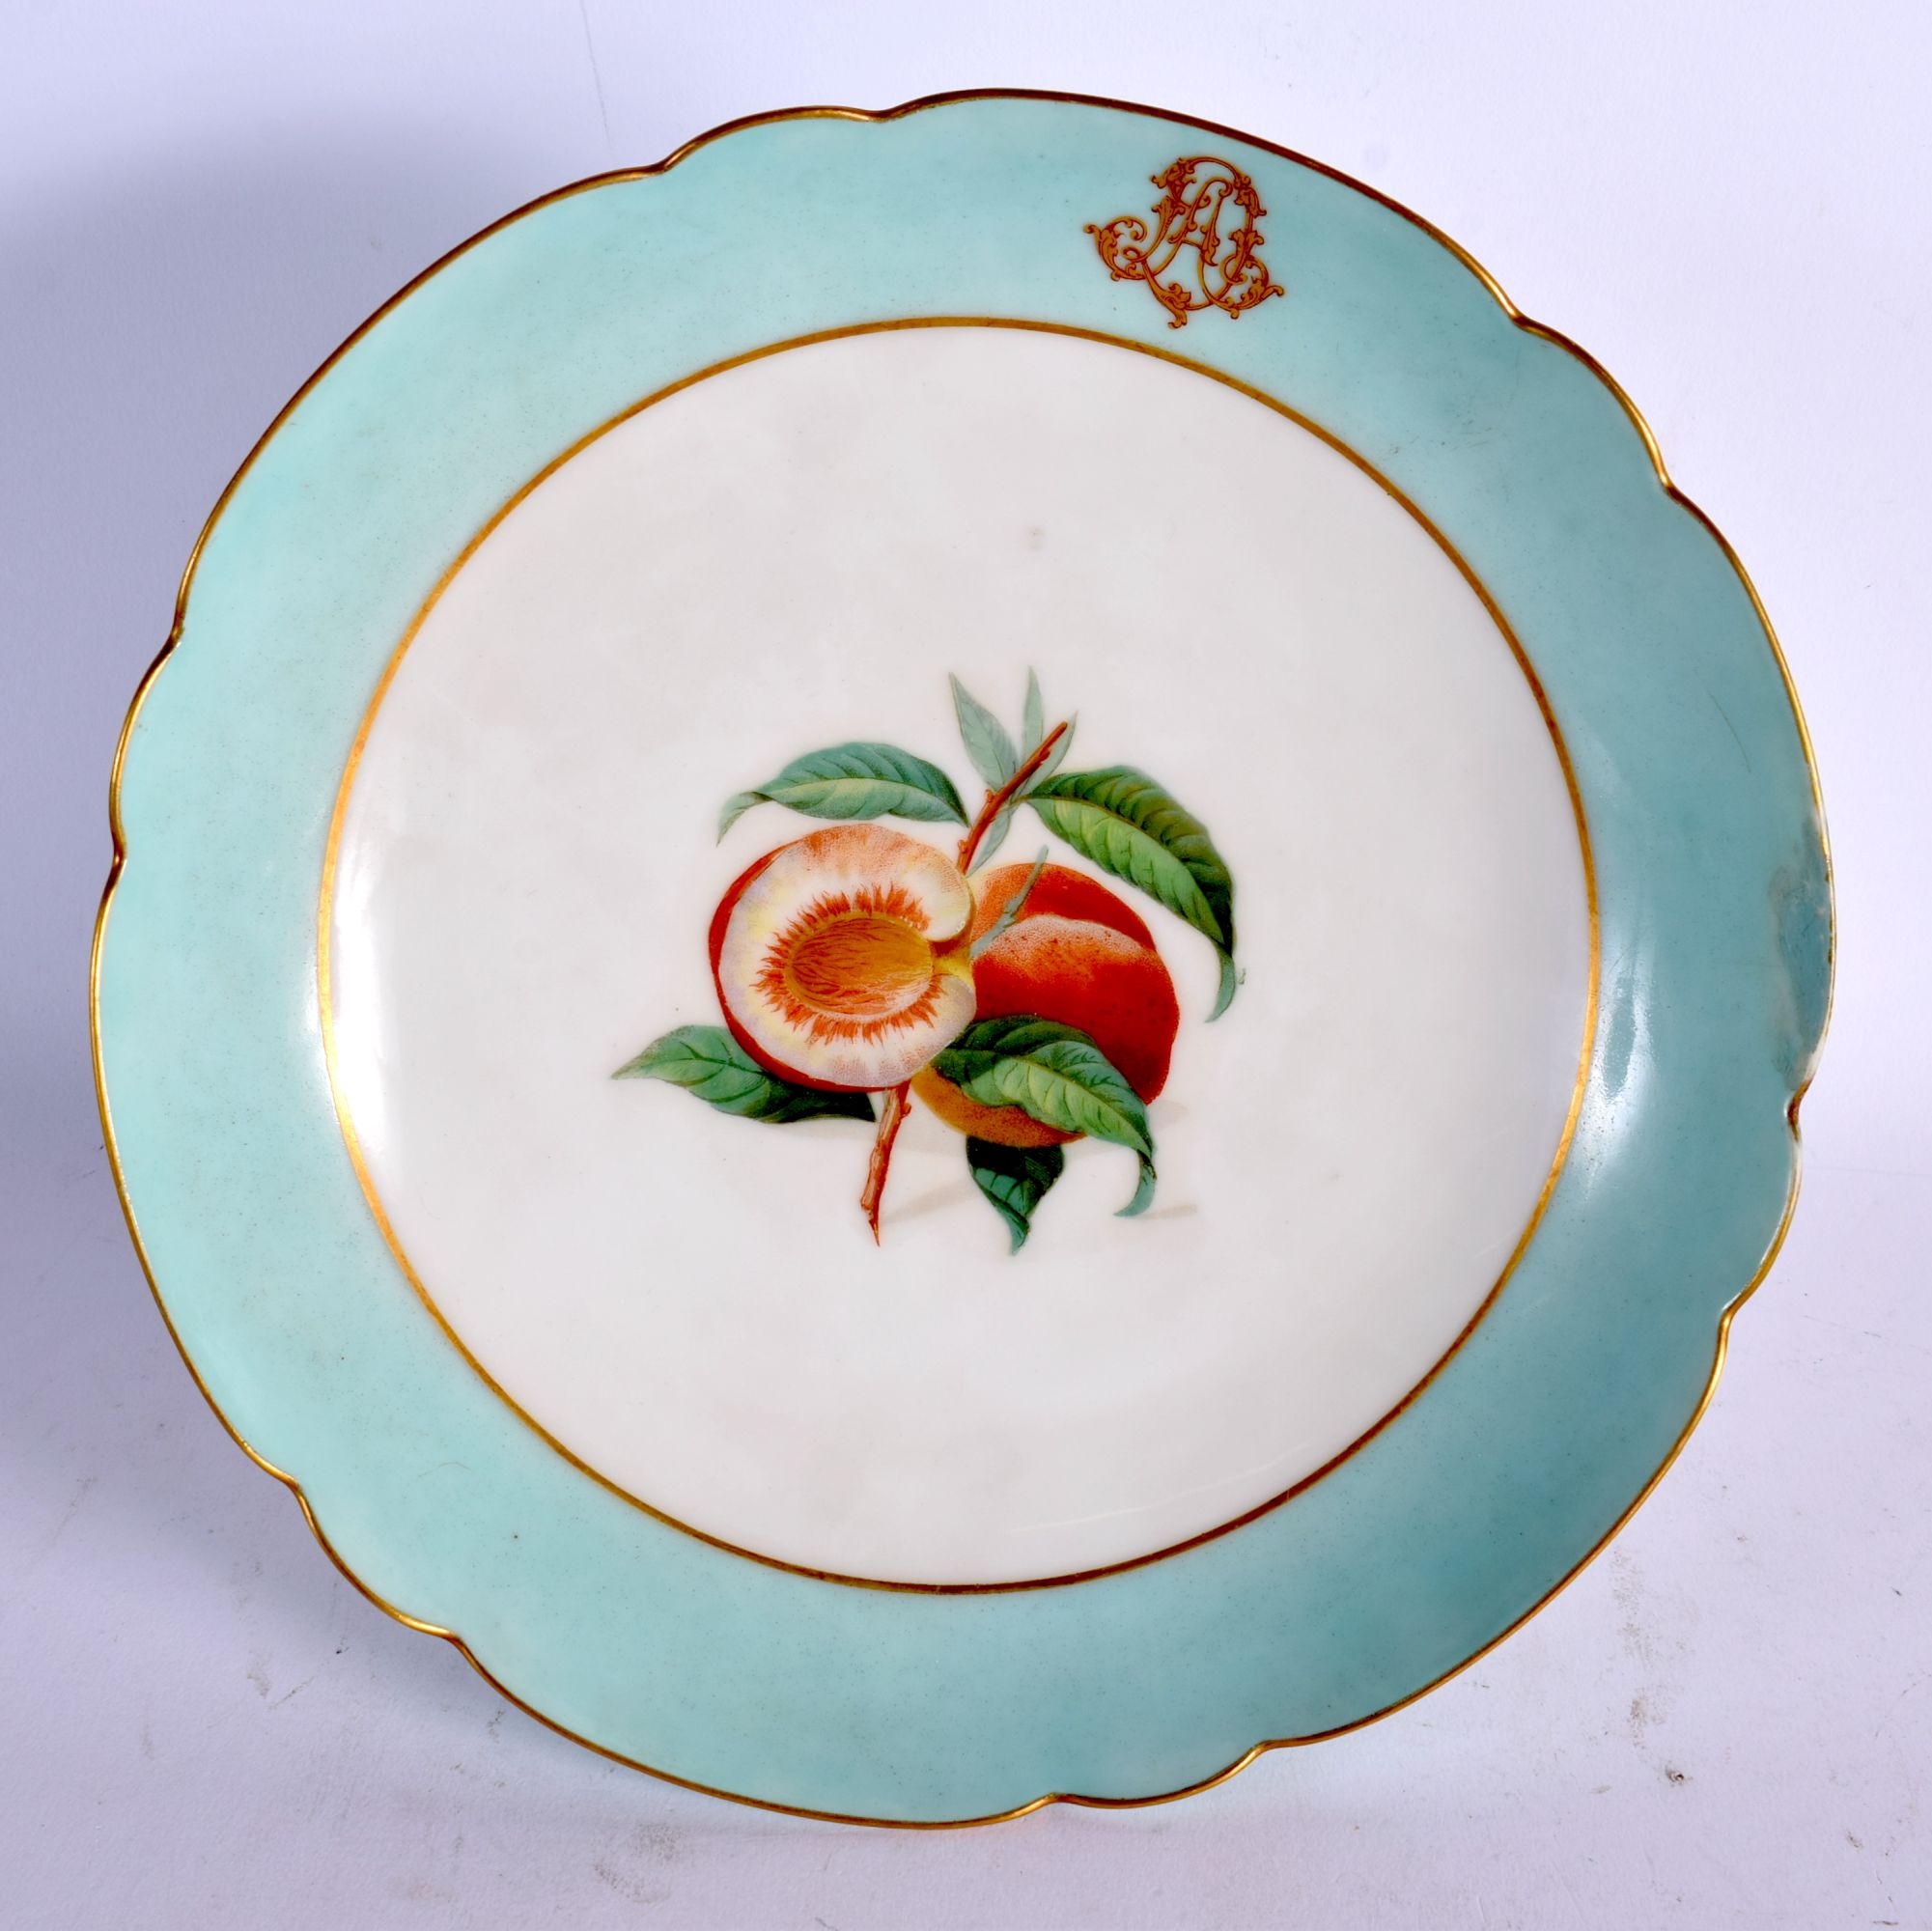 A LARGE AND EXTENSIVE LATE 19TH CENTURY FRENCH PORCELAIN DINNER SERVICE painted with a monogram. Lar - Image 3 of 14